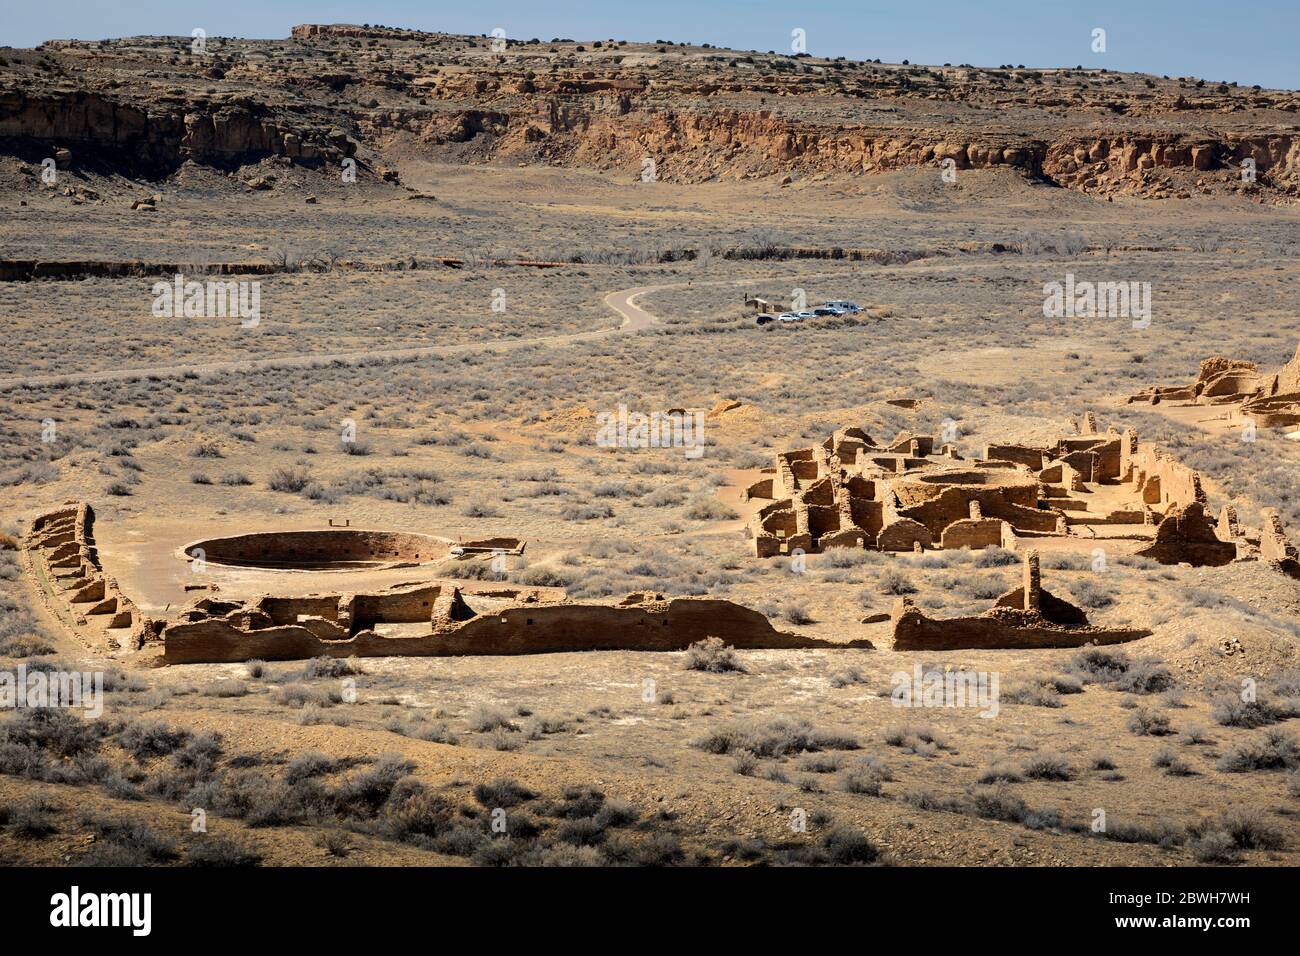 NM00375-00...NEW MEXICO - Chetro Ketl Overlook of the 900 year old ruin in Chaco Culture National Historical Park, a World Heritage Park. Stock Photo